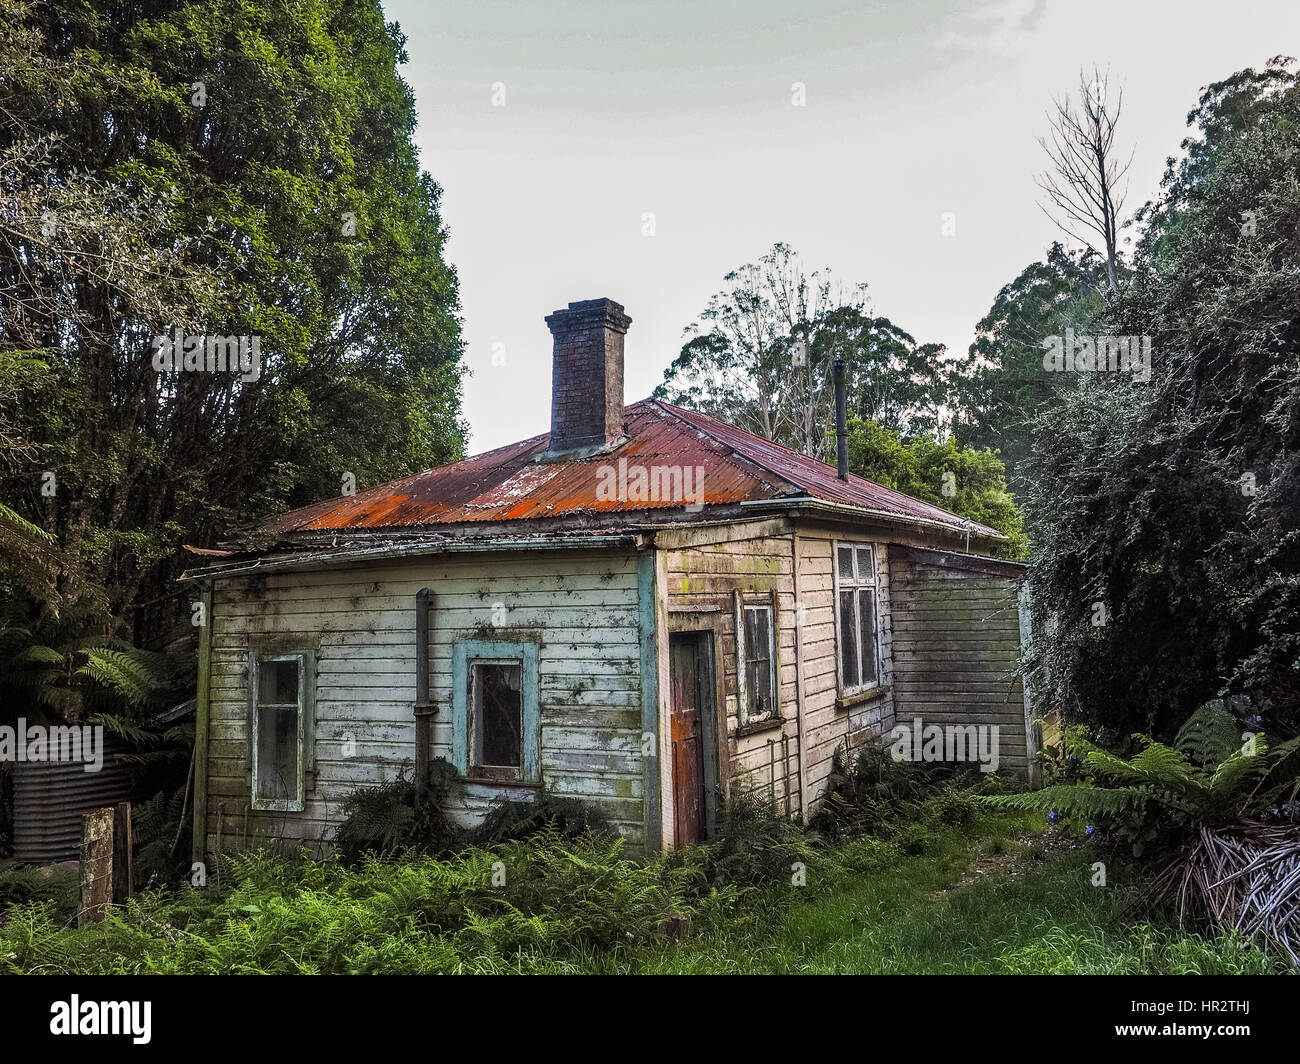 Abandoned house, Makino Valley,  New Zealand. Home of 1920s pioneer settler his farm hewed out of hill country forests,  now regenerating shrub lands. Stock Photo